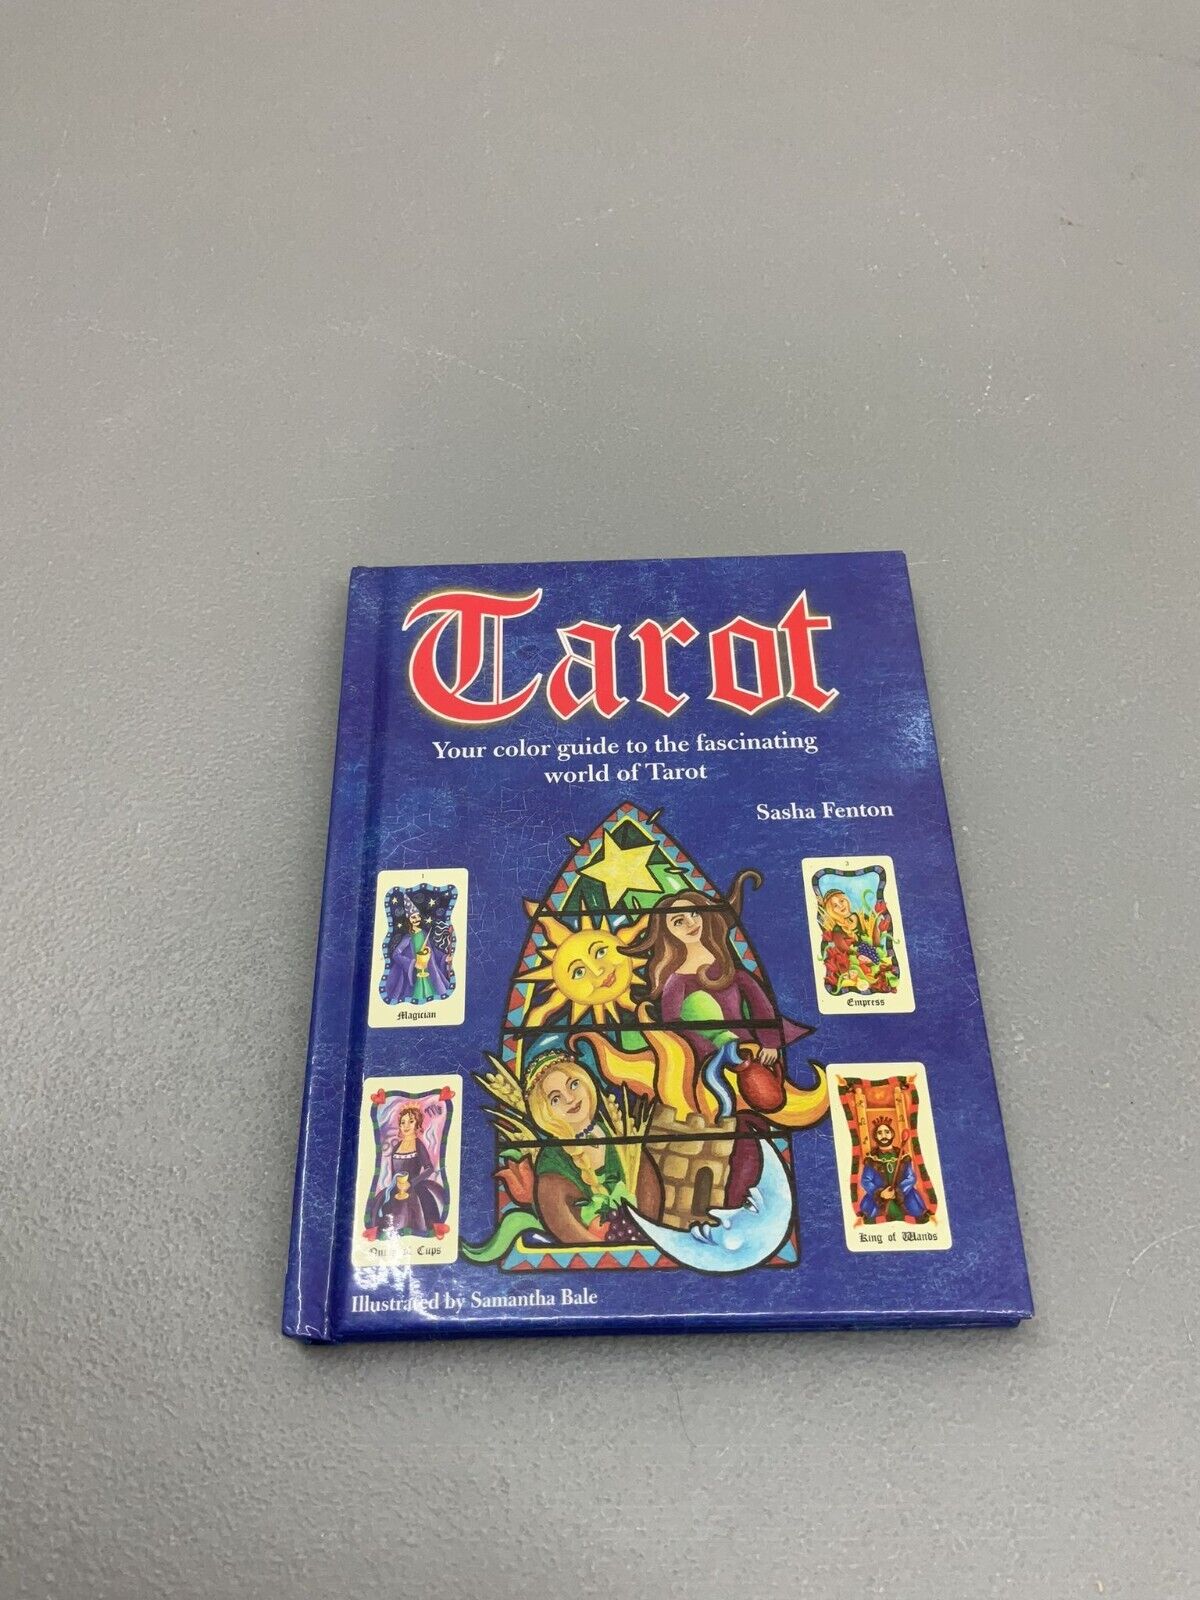 Vintage 1998 Tarot Your Color Guide To The Fascinating World Of Tarot